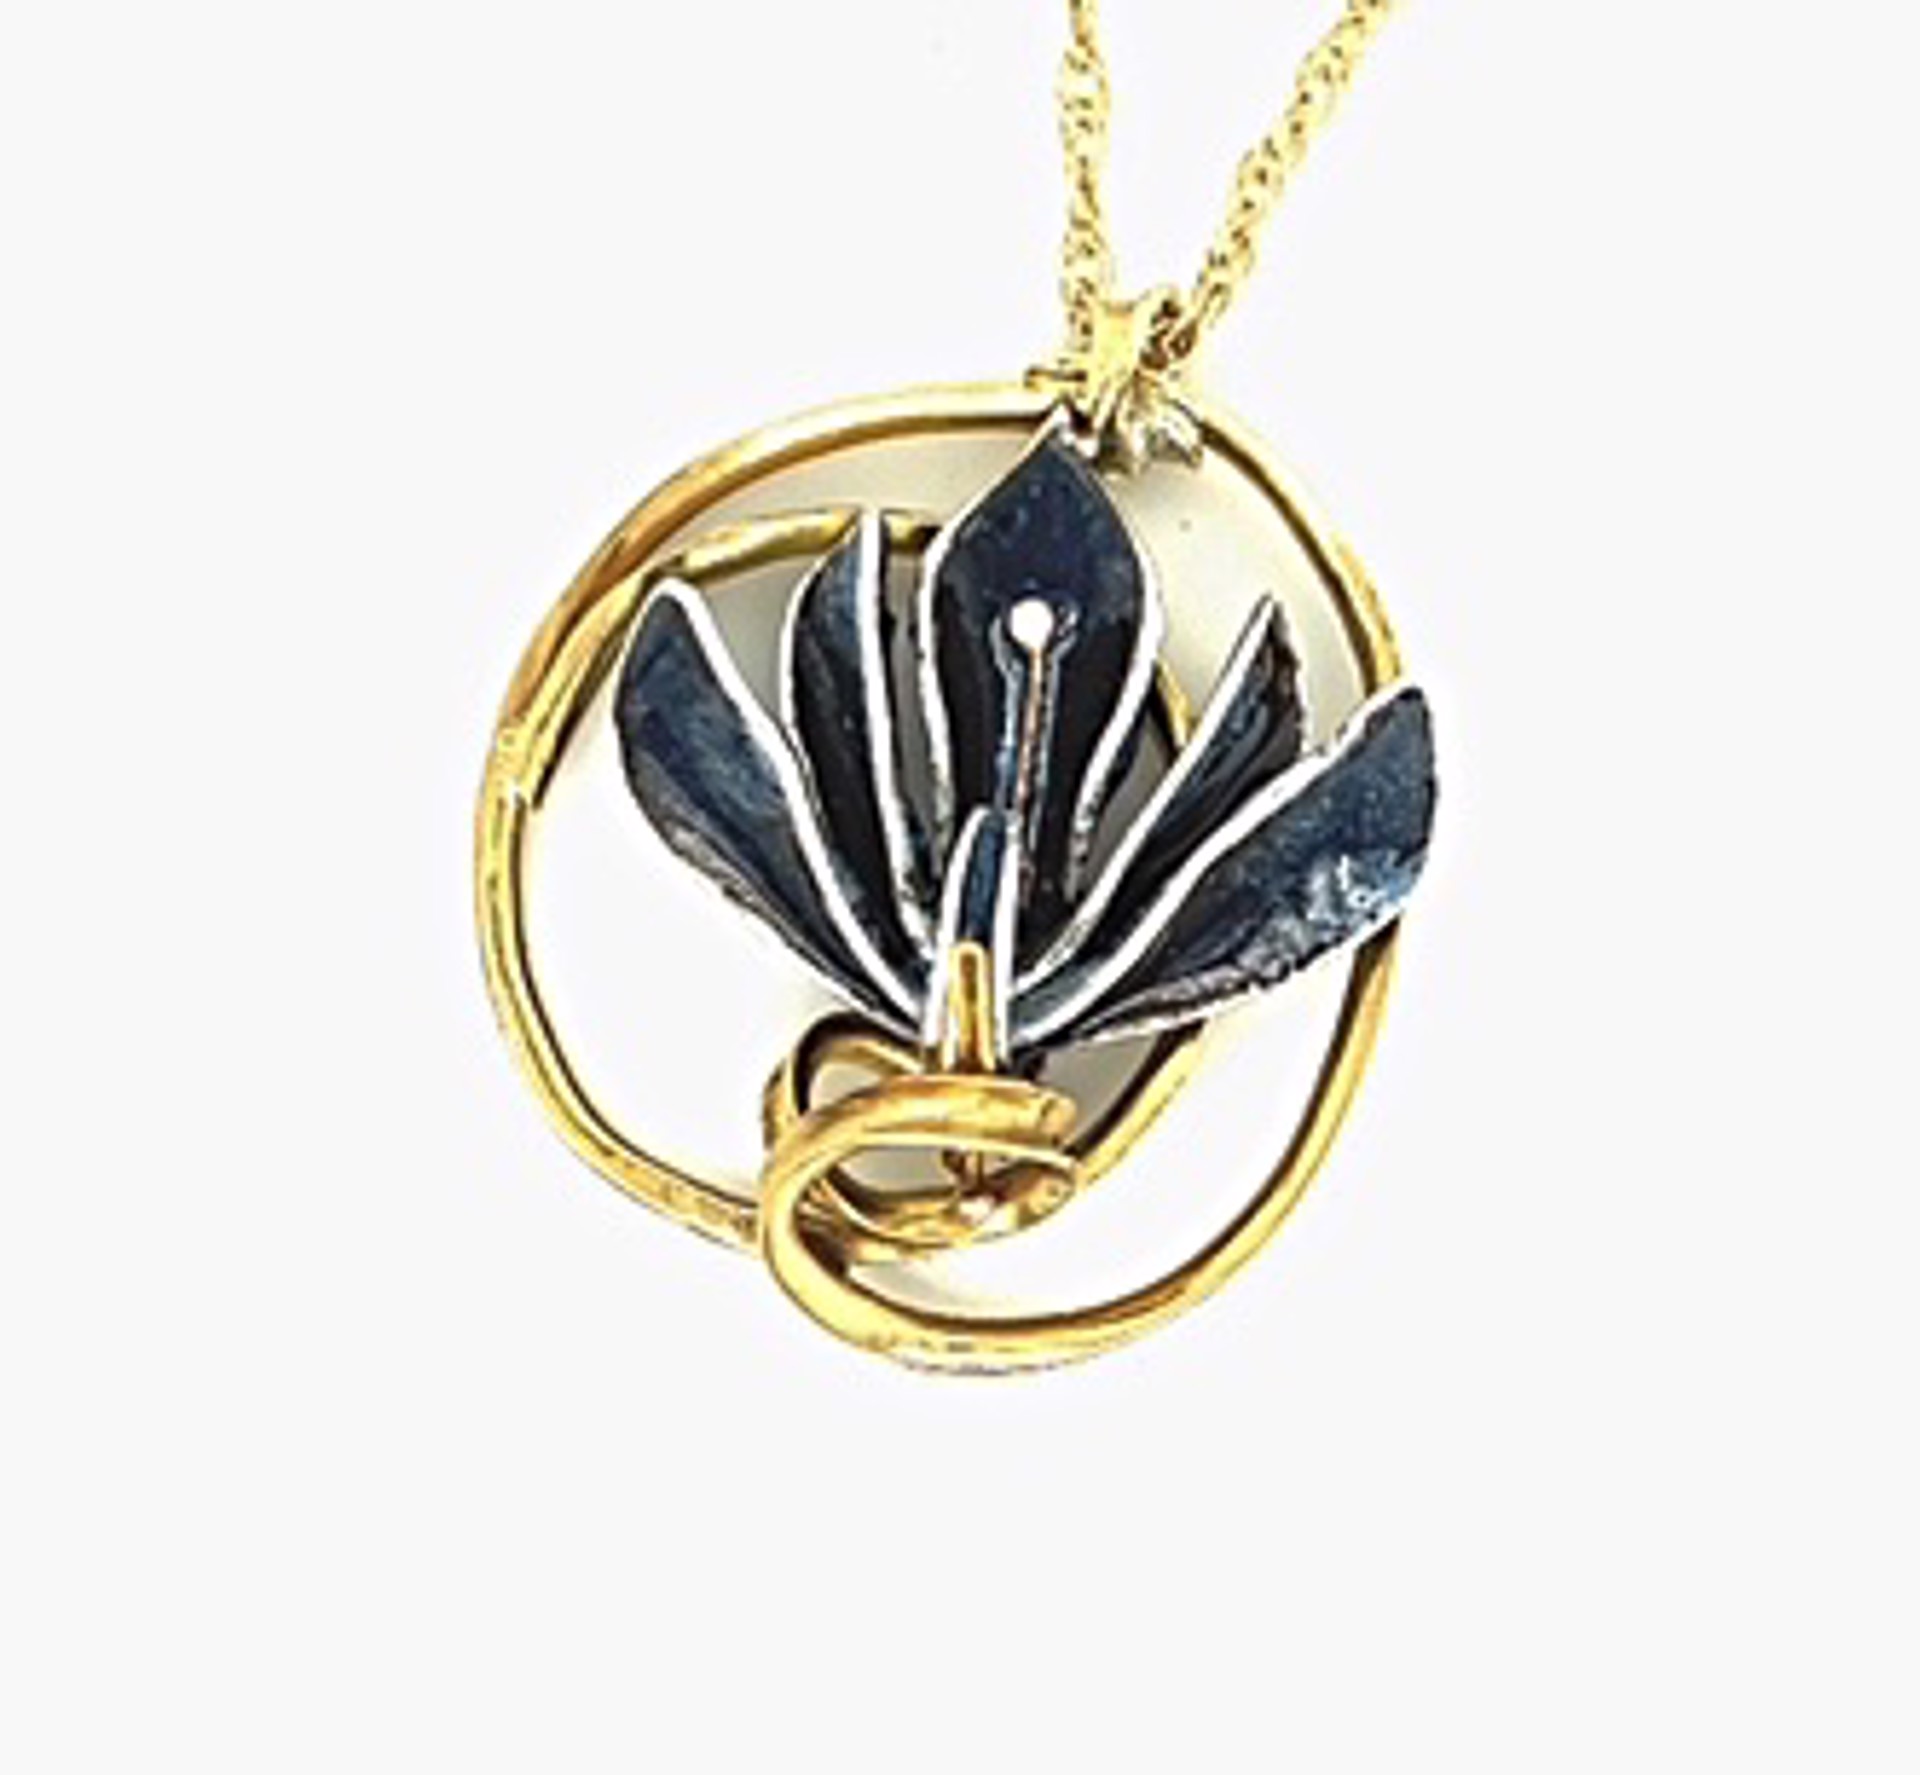 Necklace - Lotus Flower with 22K Gold/ Silver Enamel by Pattie Parkhurst